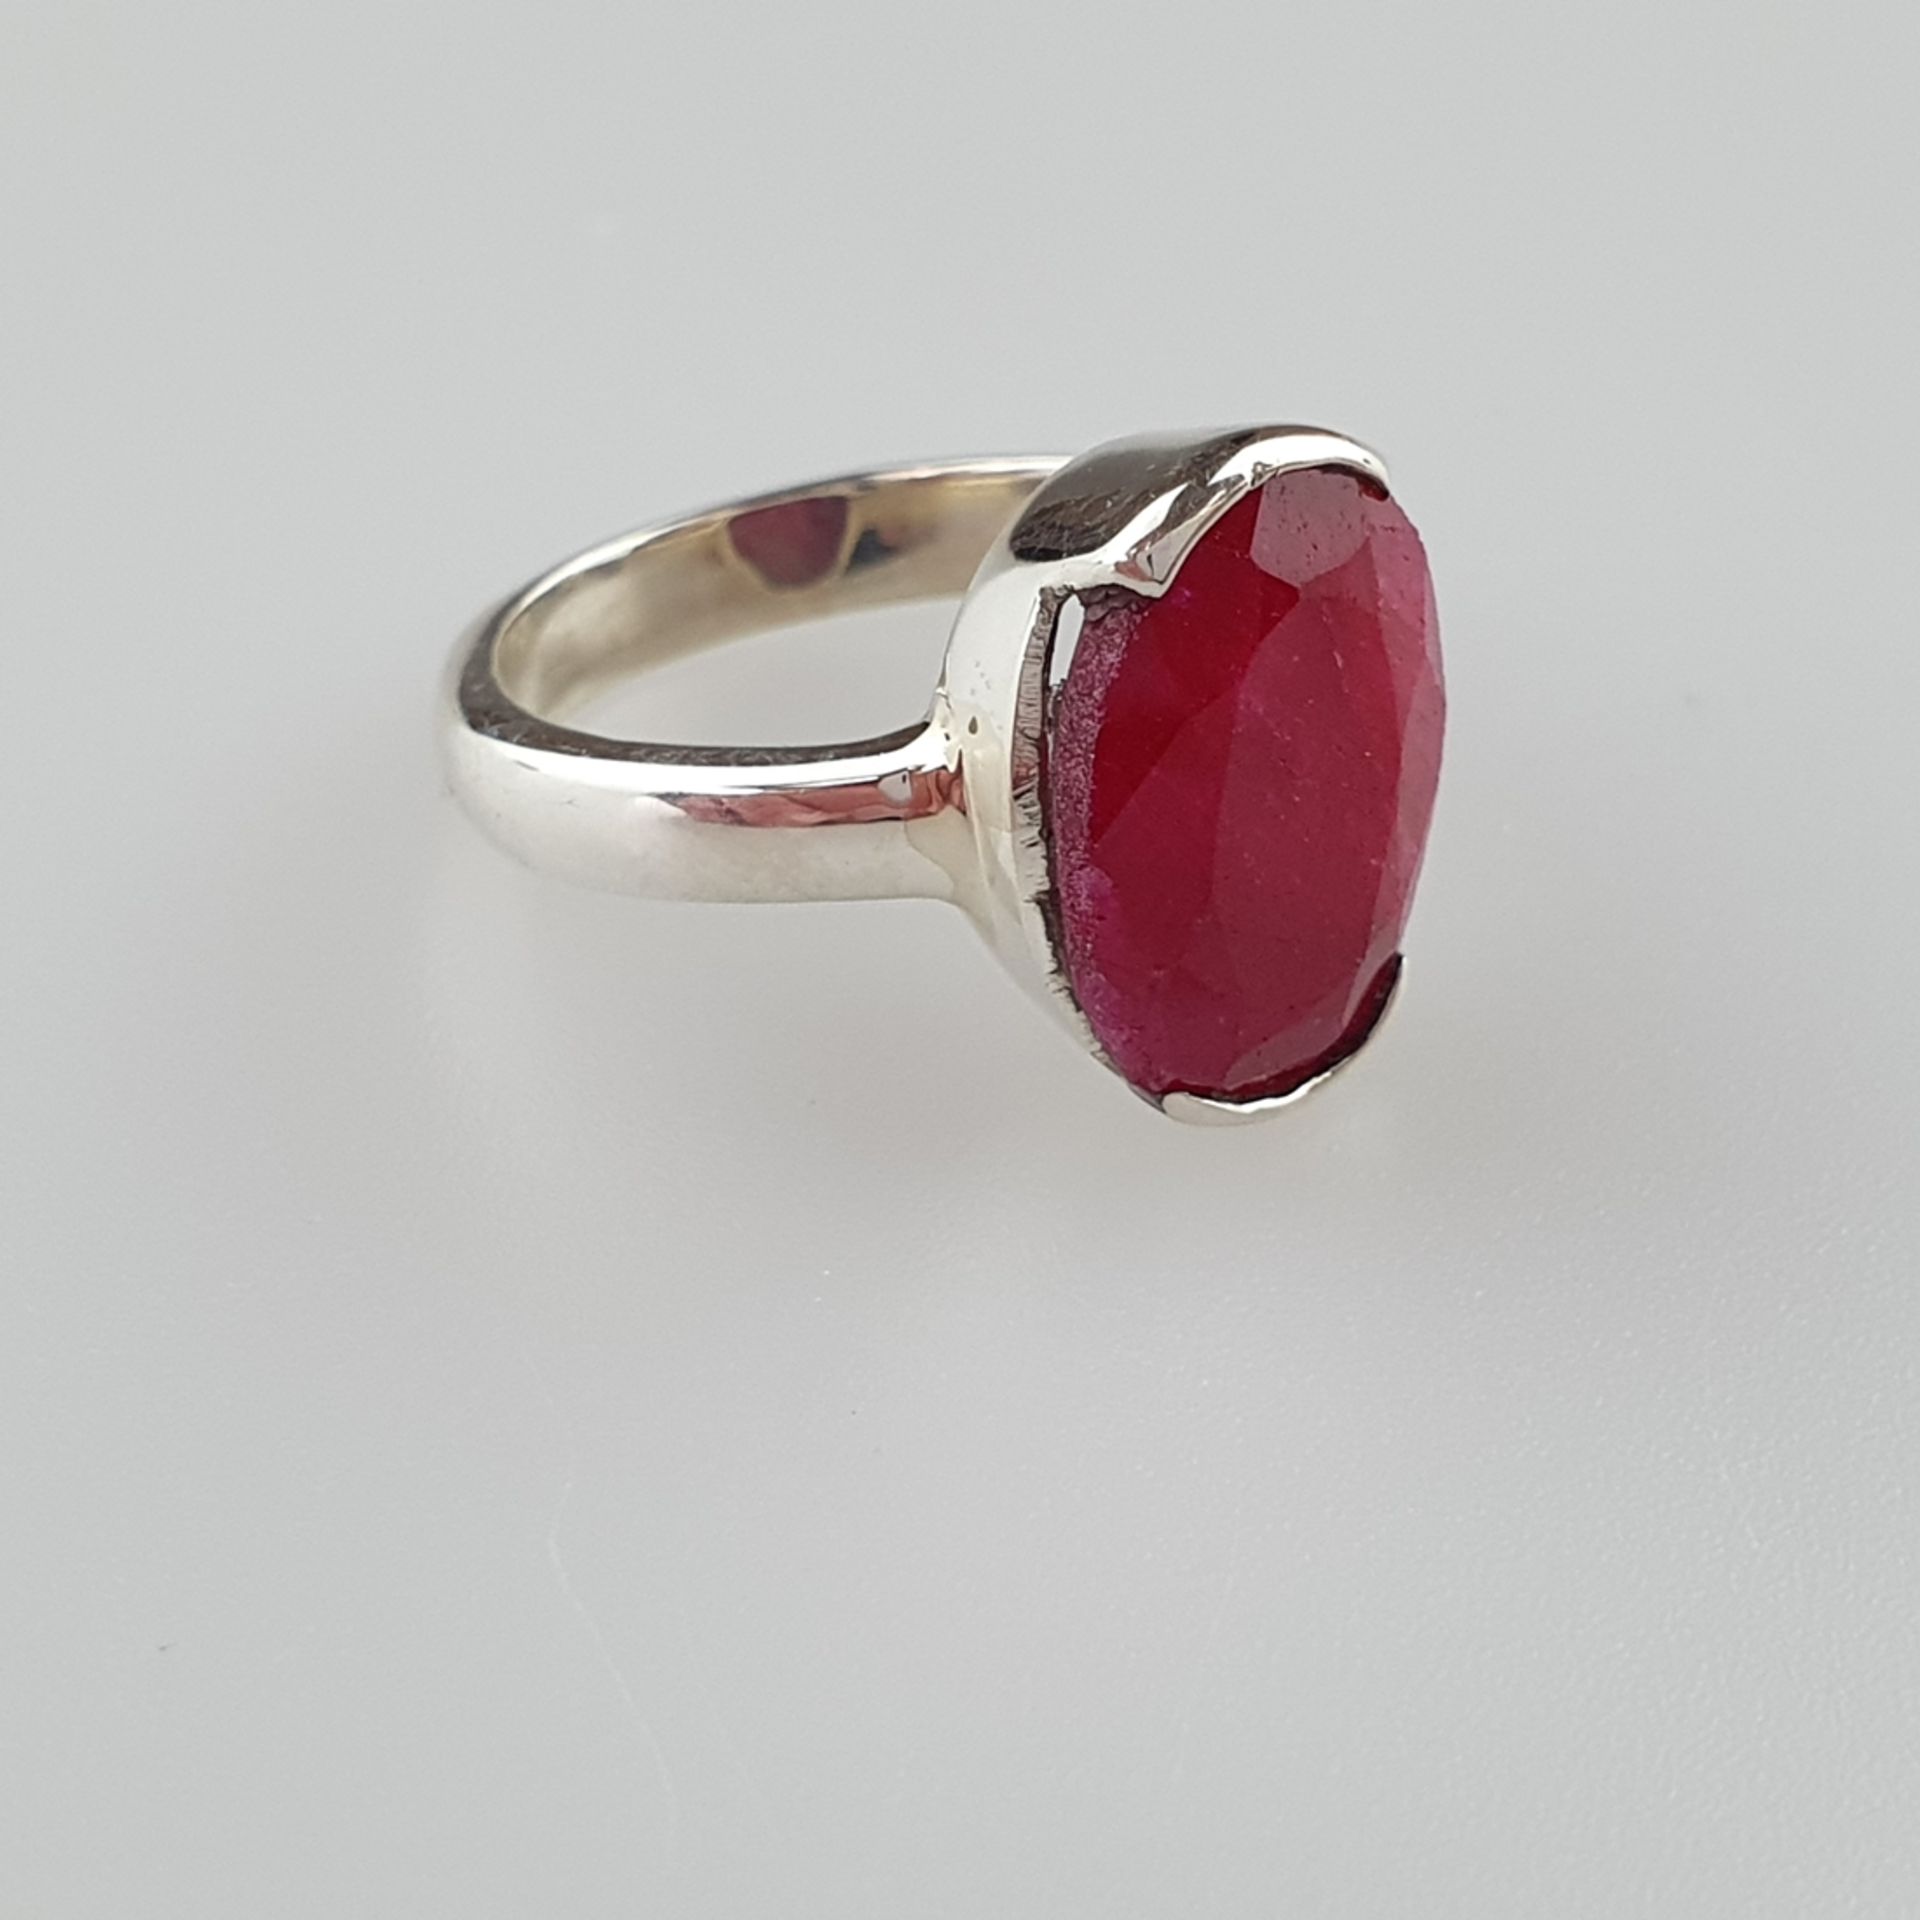 Oval Ruby Set In 92.5 Sterling Silver Ring, ca. 4,8g, ring size: ca. 16,5, stone measurements ca. 1 - Image 2 of 5